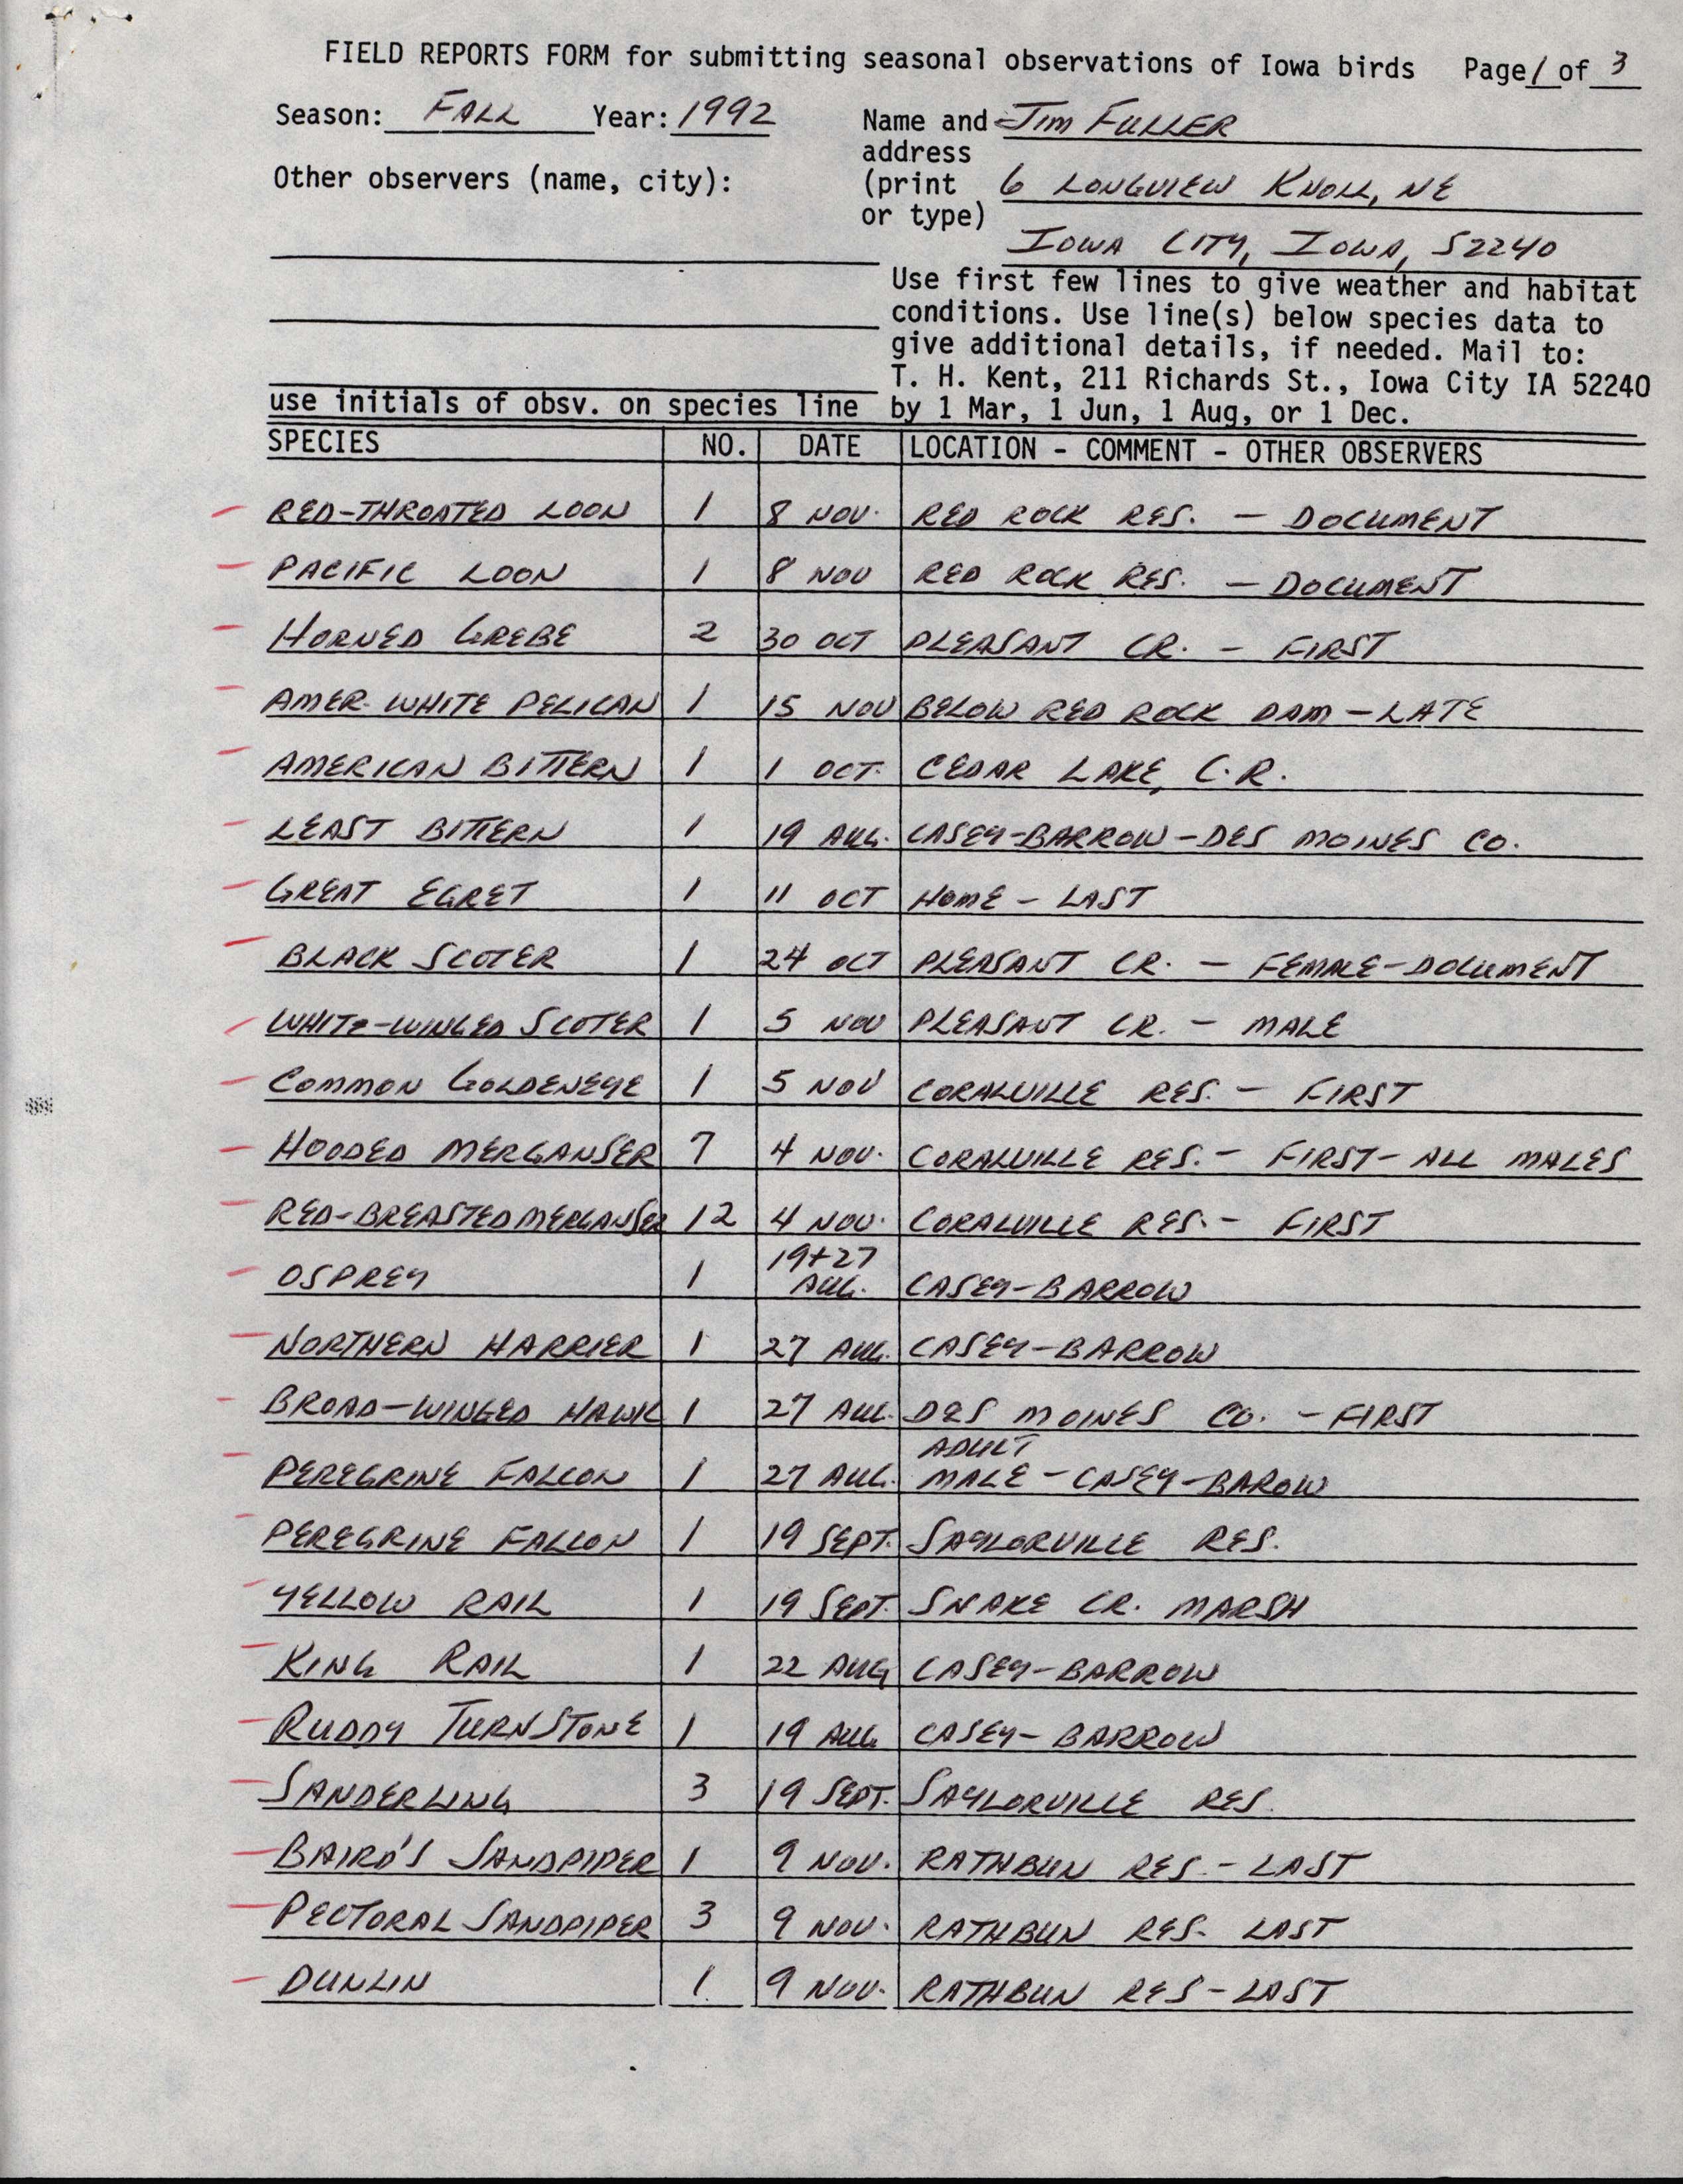 Field reports form for submitting seasonal observations of Iowa birds, James L. Fuller, fall 1992